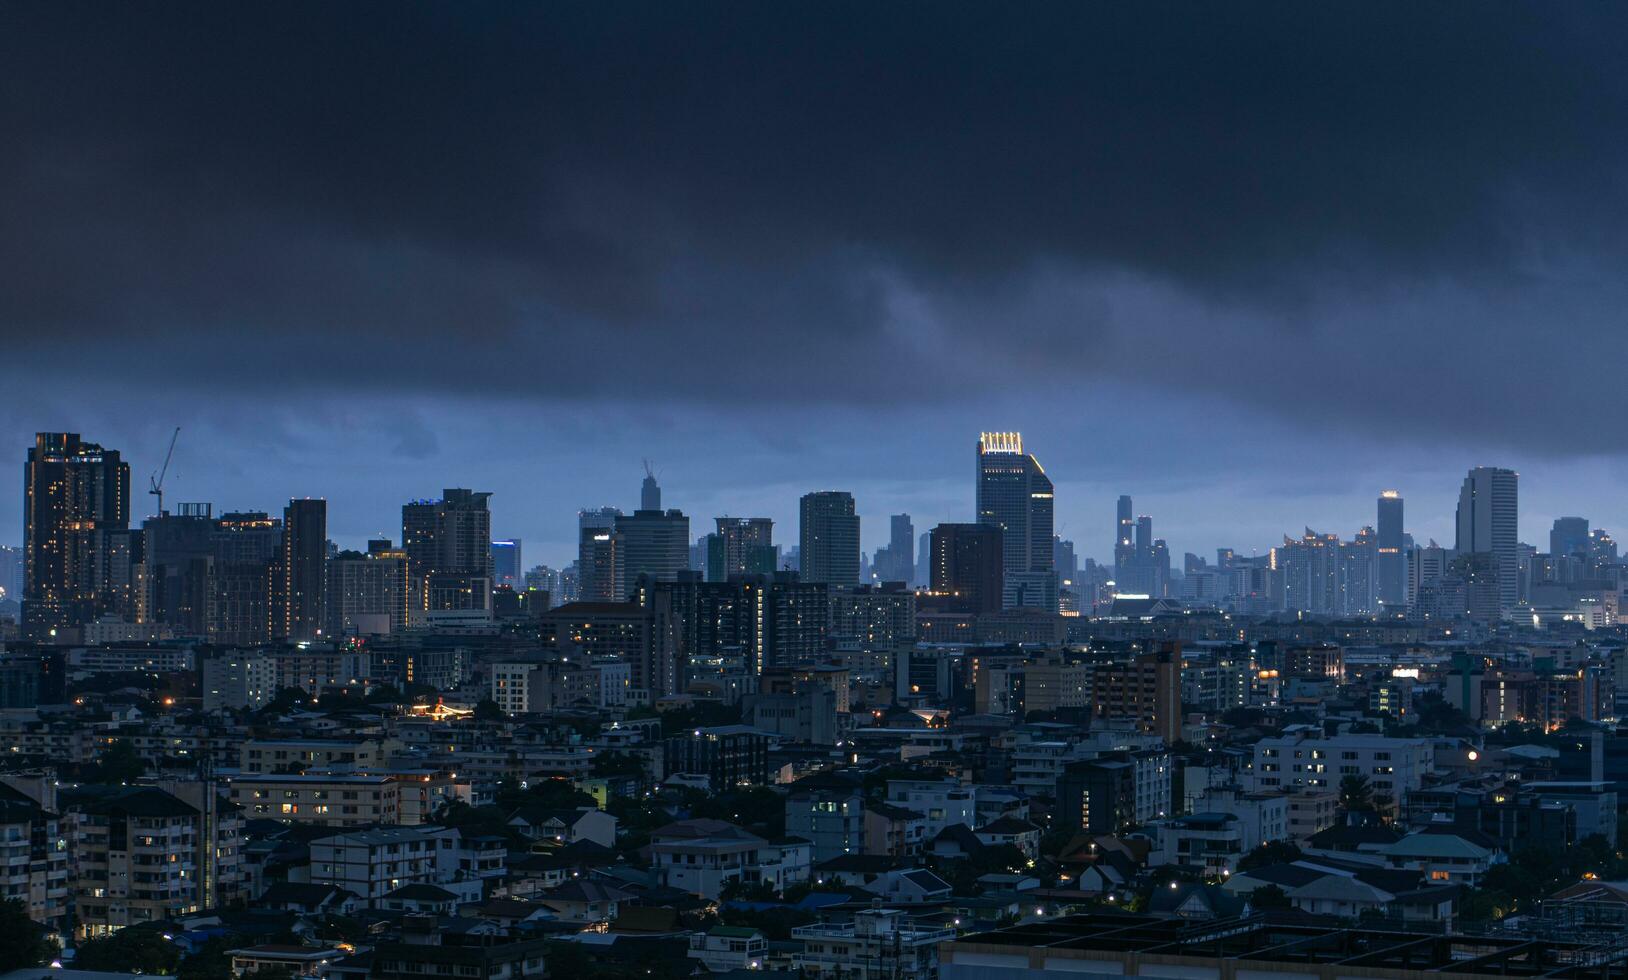 View city of Bangkok in Thailand before the storm in the twilight , rainy season thick clouds cover the town, global warming climate change concept photo